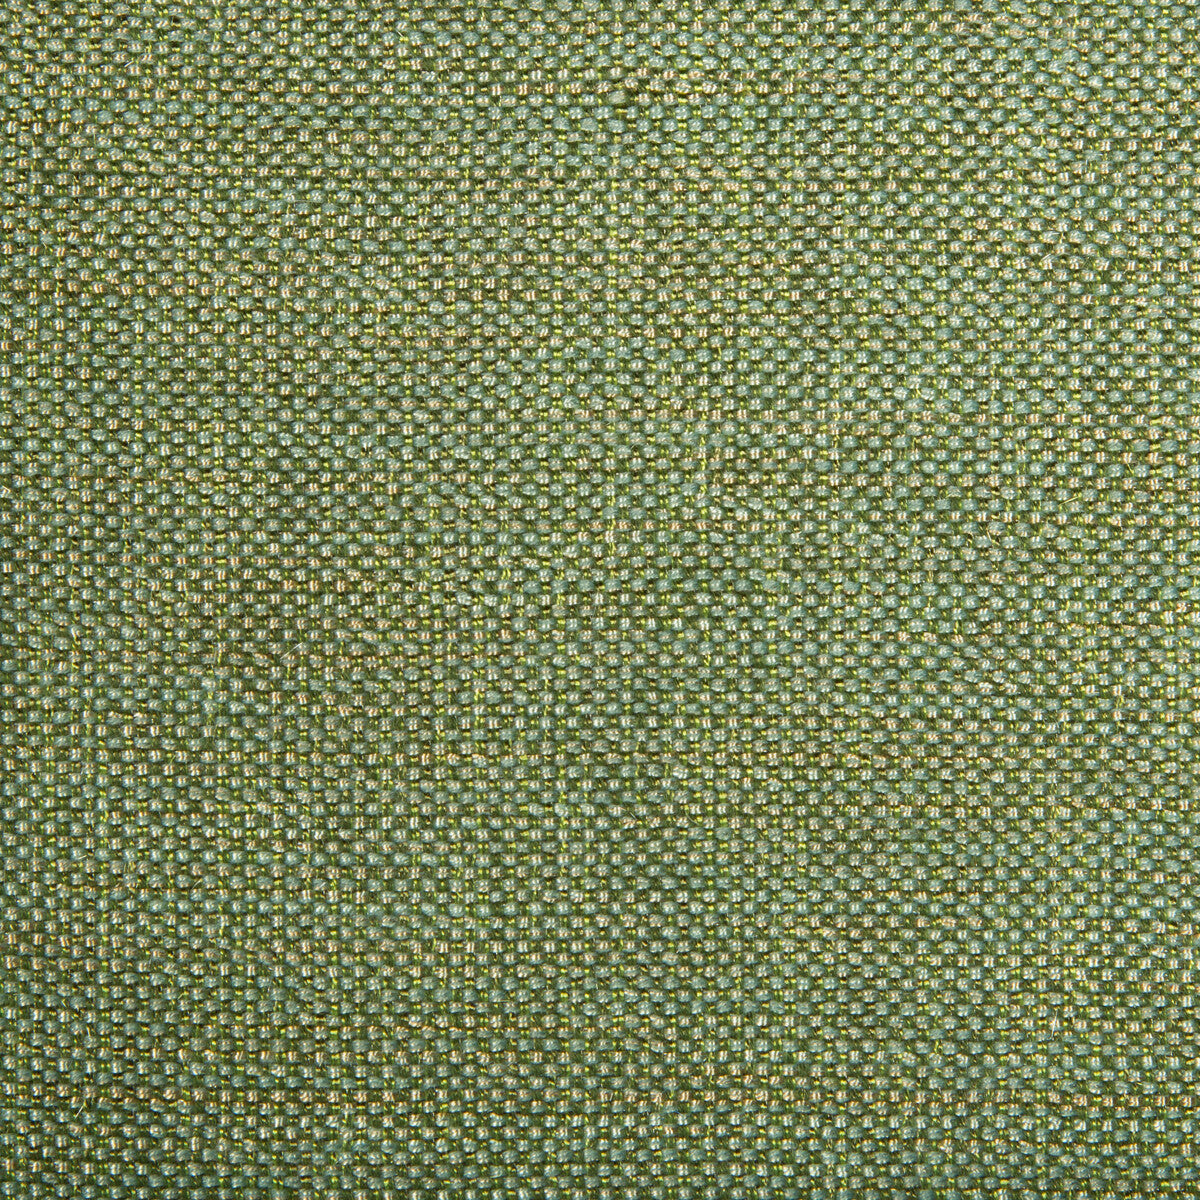 Kravet Contract fabric in 34926-3 color - pattern 34926.3.0 - by Kravet Contract